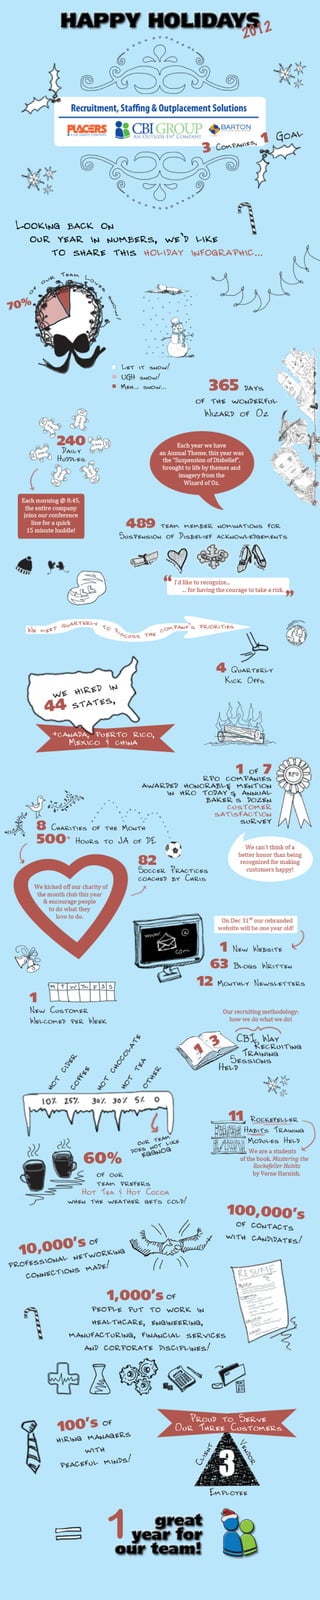 2012 Outside-In Holiday Infographic